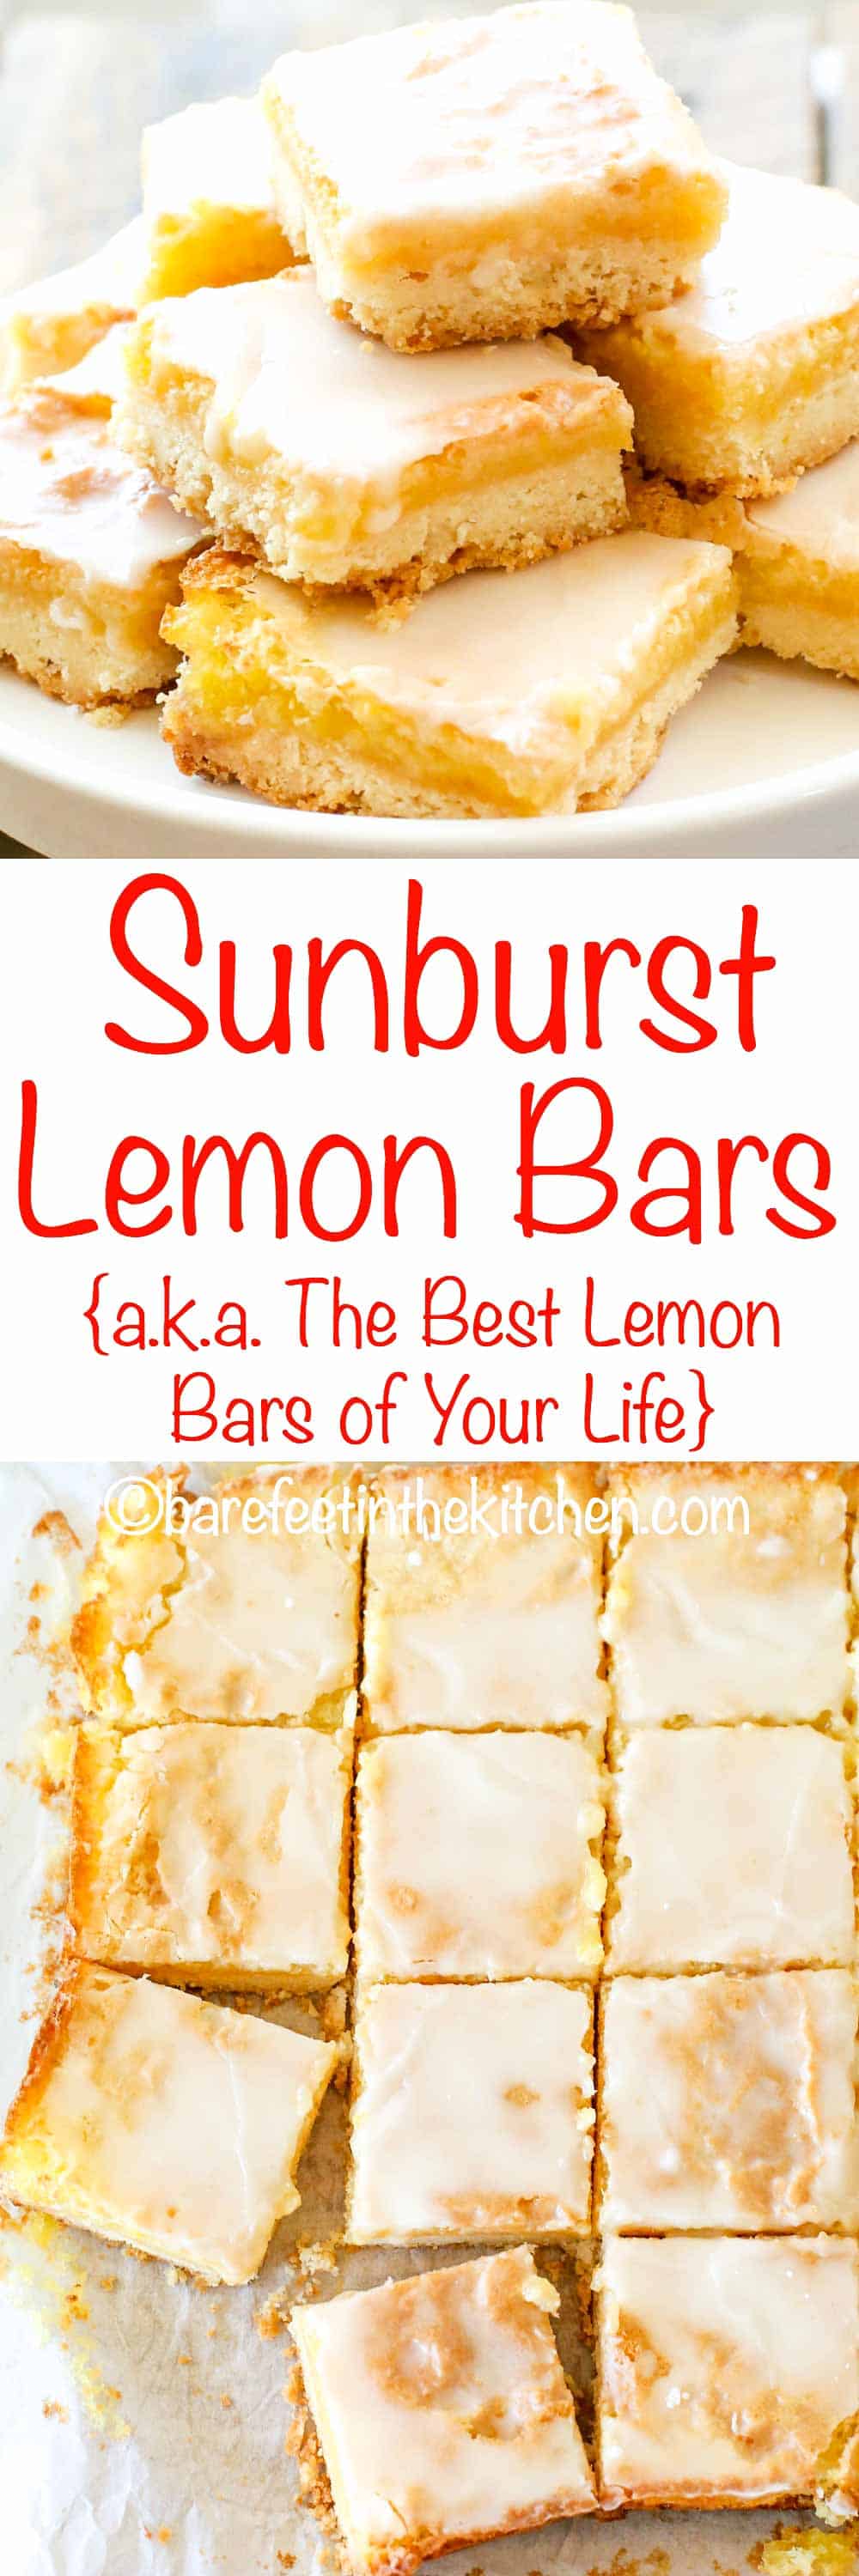 The Best Lemon Bars of Your Life - Barefeet In The Kitchen